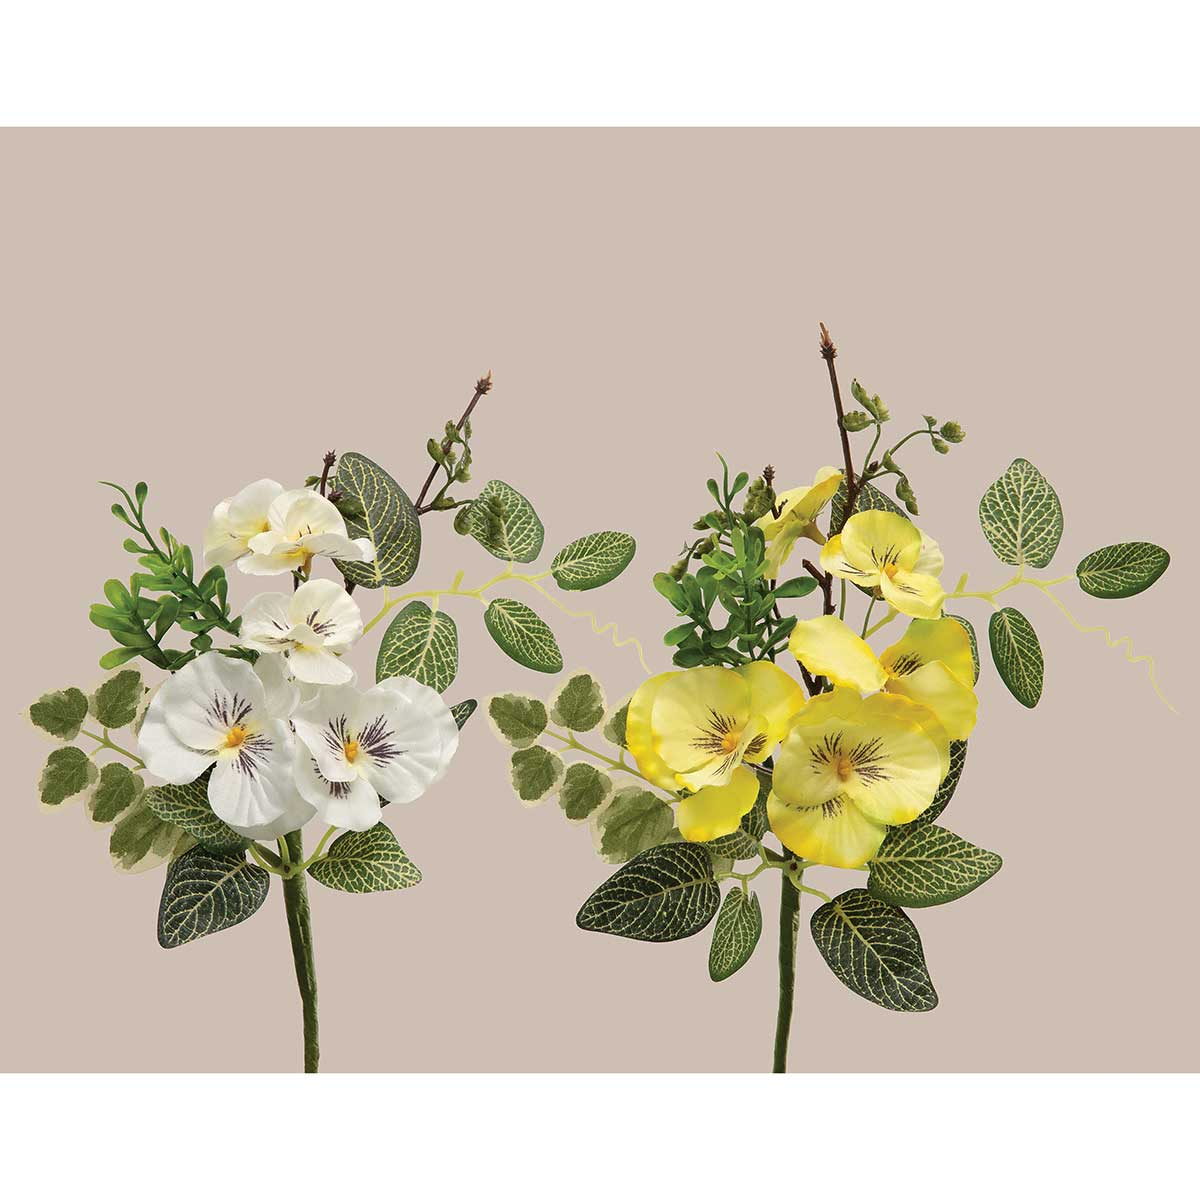 PIK PANSY/FOLIAGE WHITE 7IN X 12IN POLYESTER